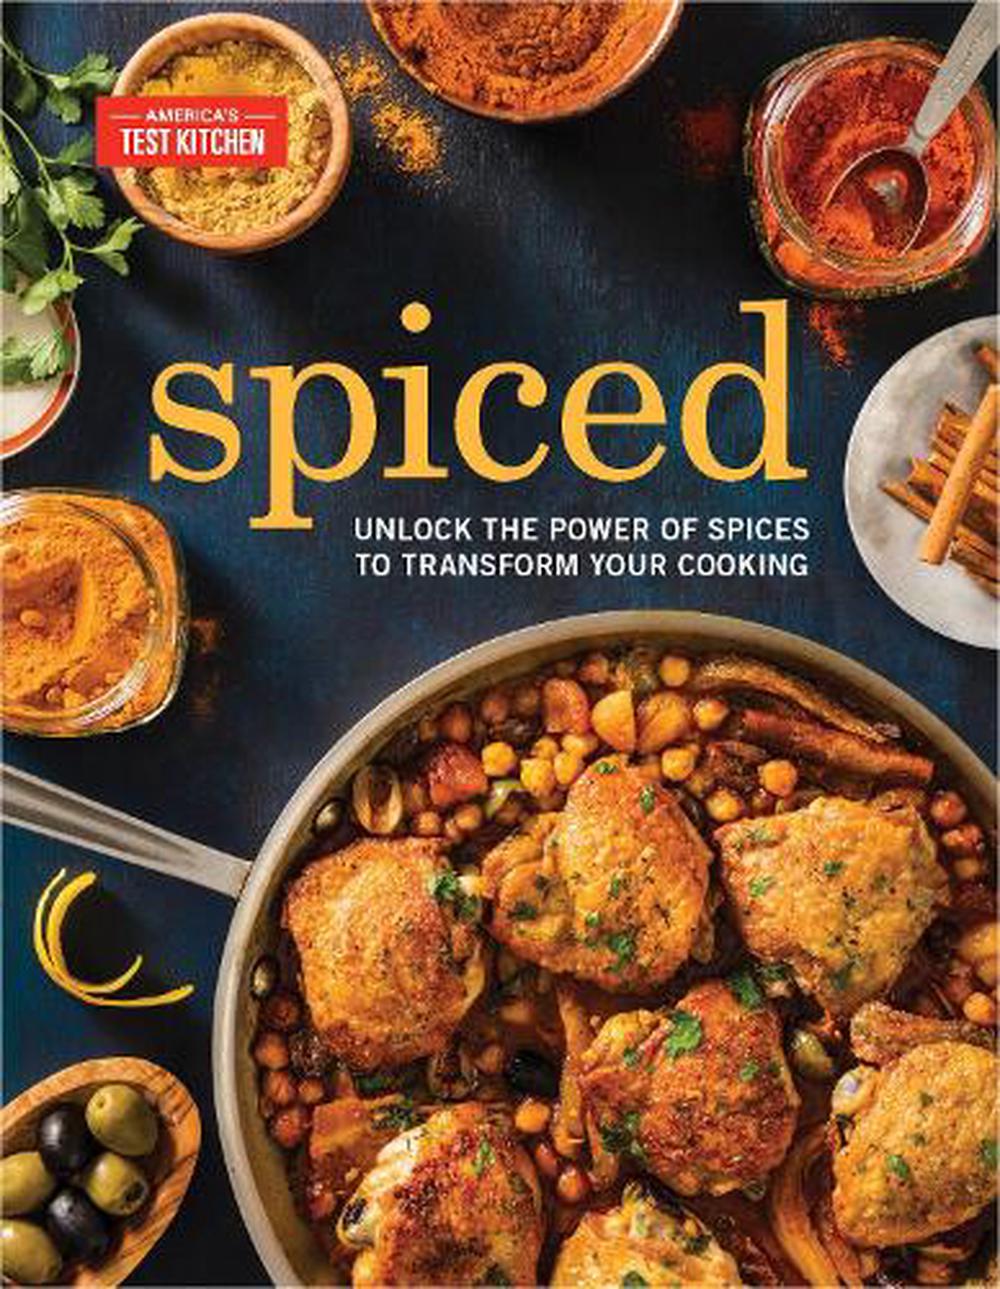 Spiced by America's Test Kitchen, Paperback, 9781945256776 | Buy online ...